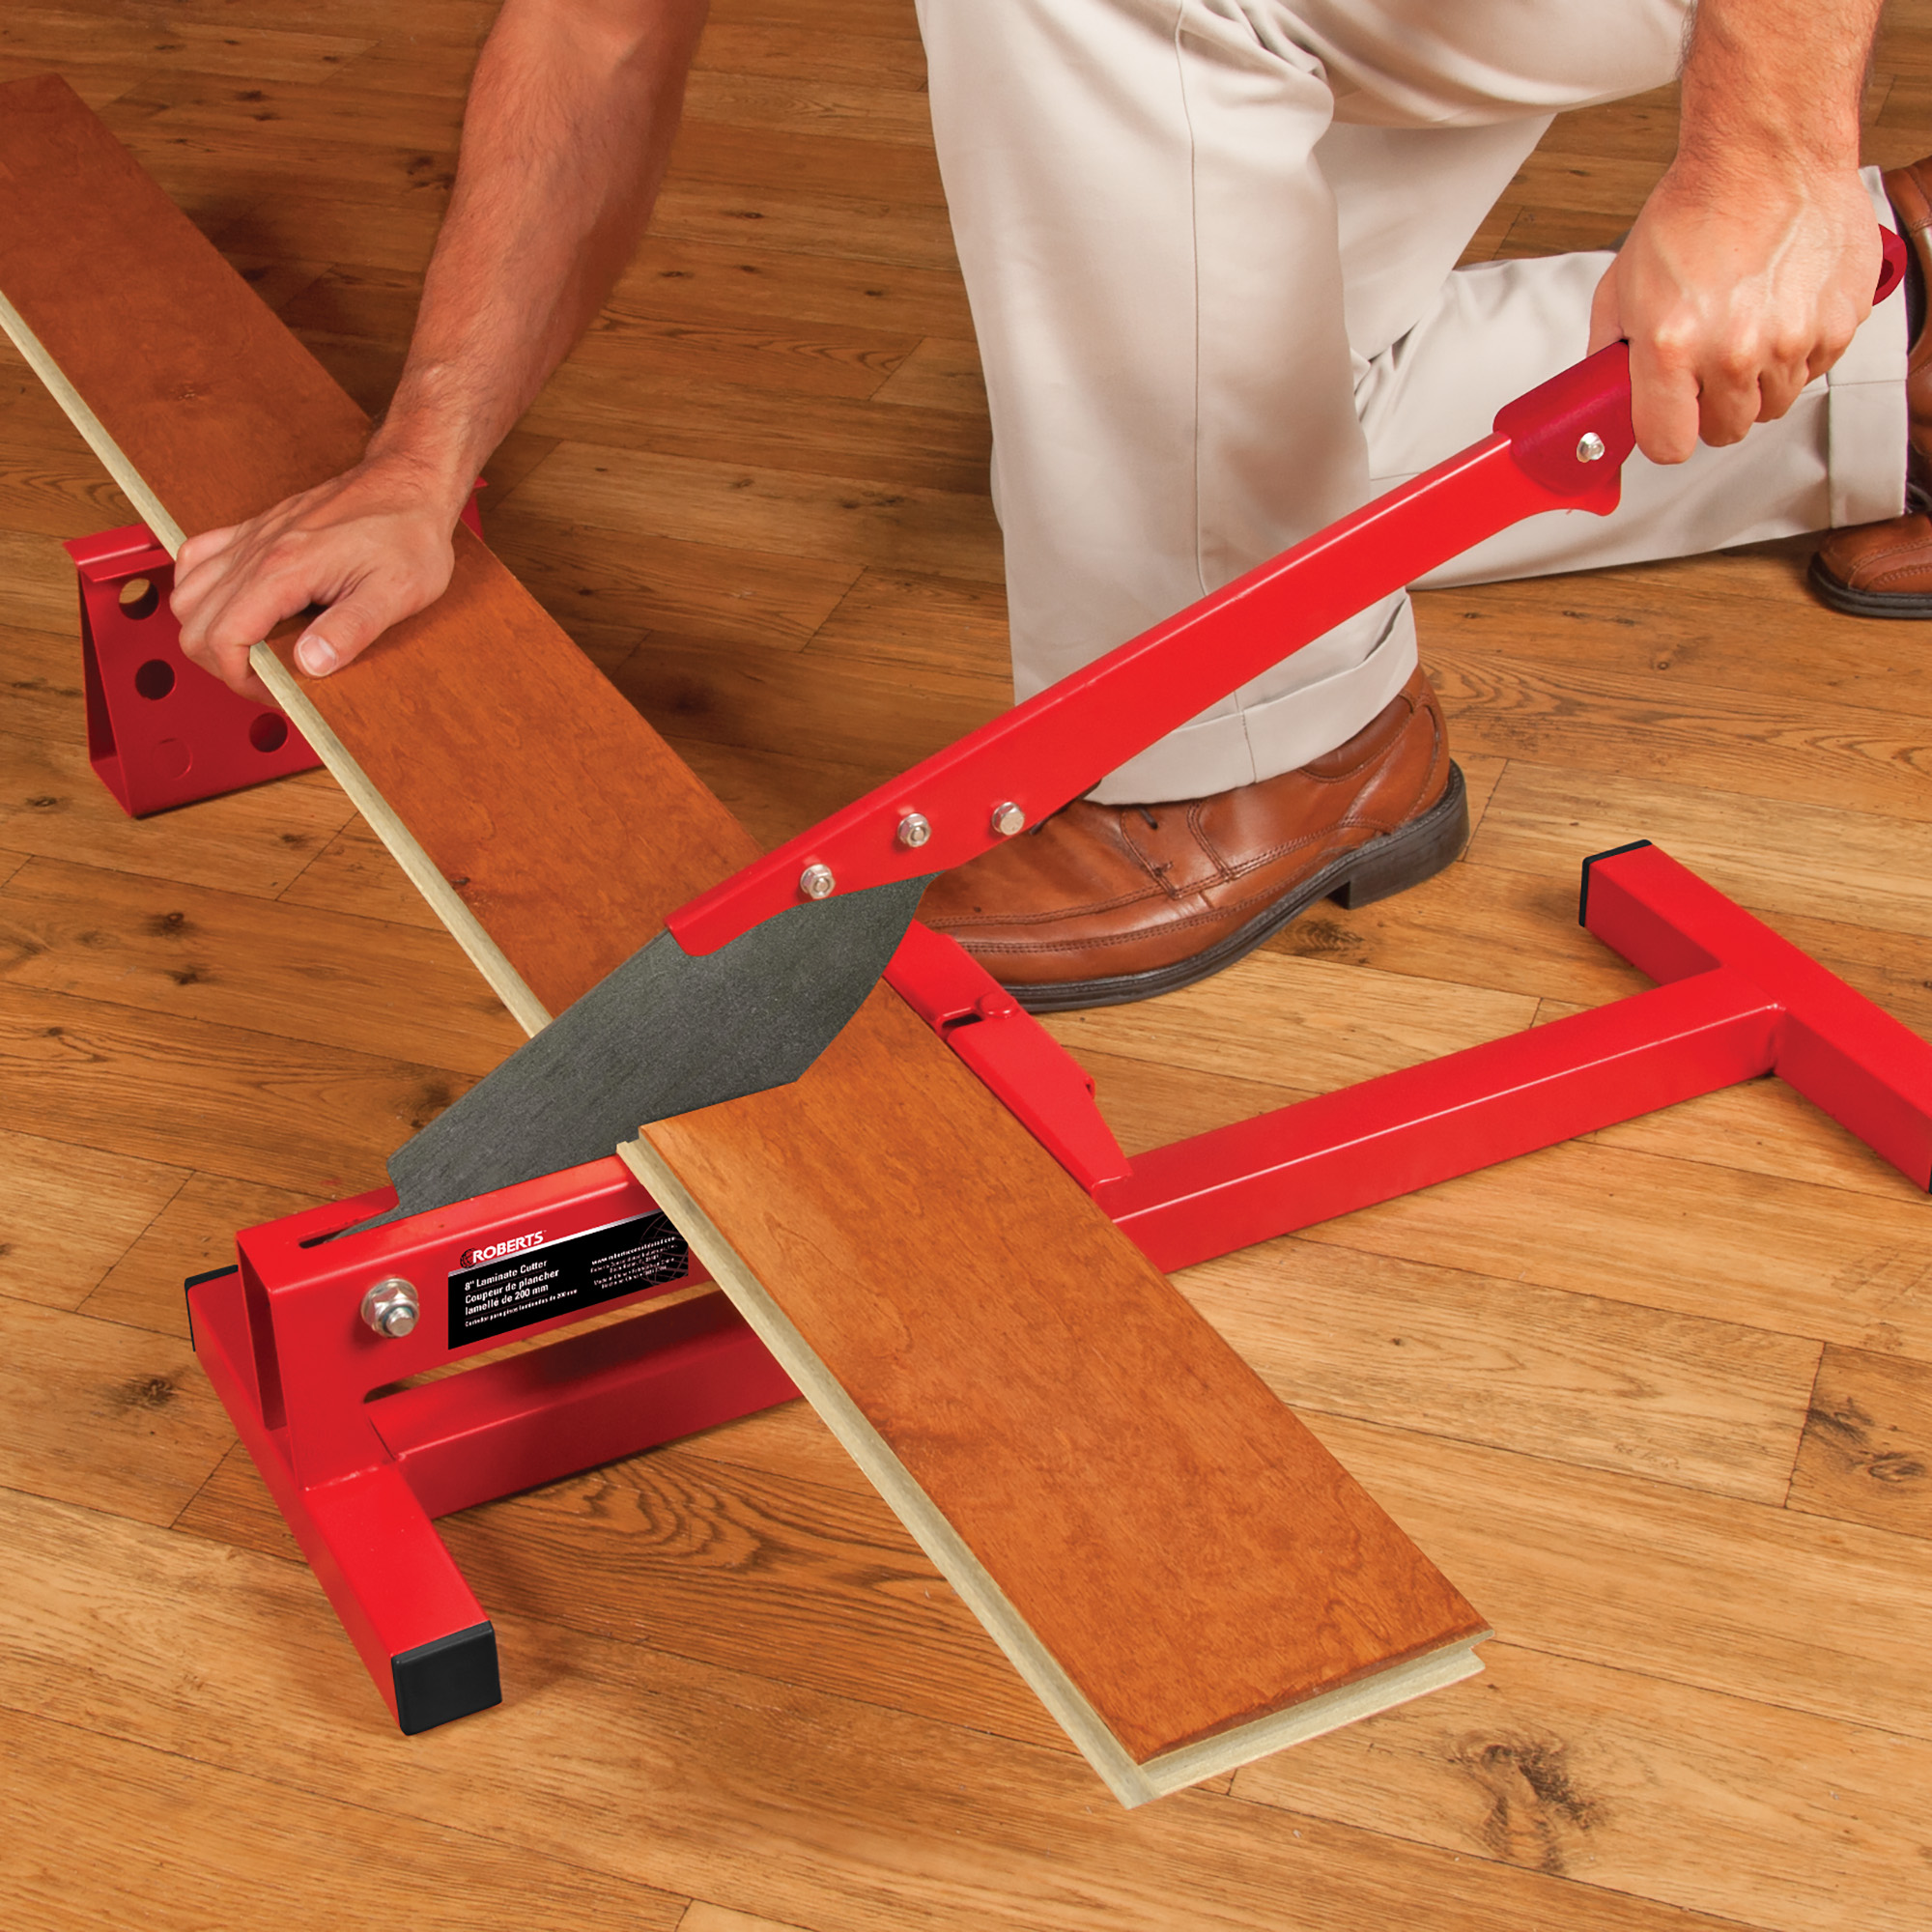 8 Laminate Cutter Roberts Consolidated, What Tool Do You Need To Cut Laminate Flooring